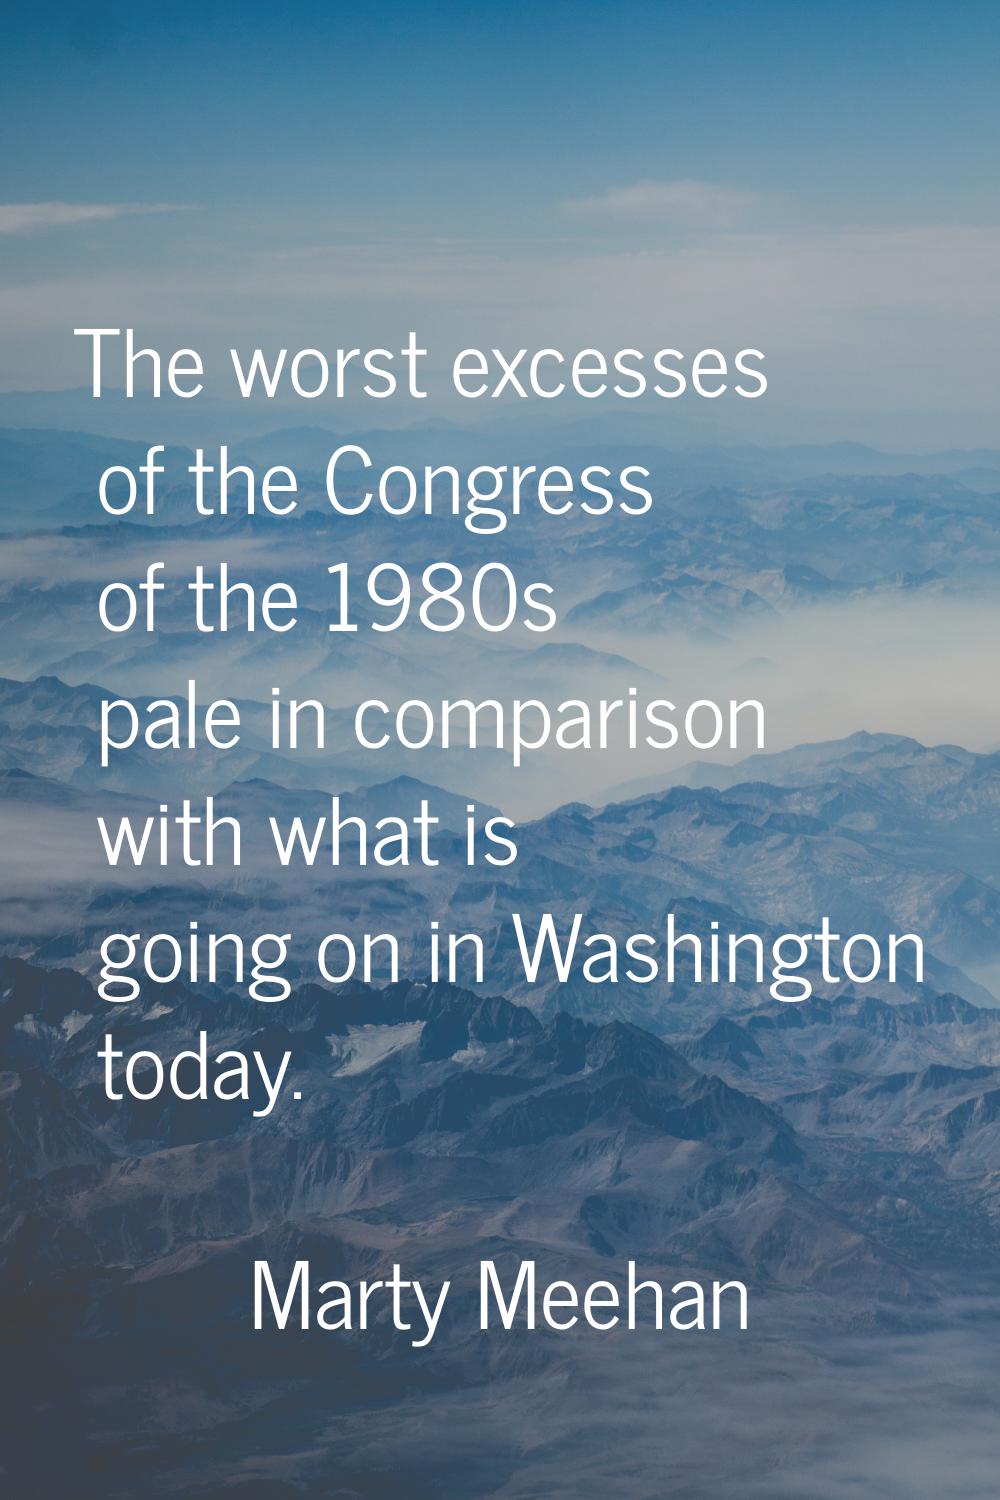 The worst excesses of the Congress of the 1980s pale in comparison with what is going on in Washing